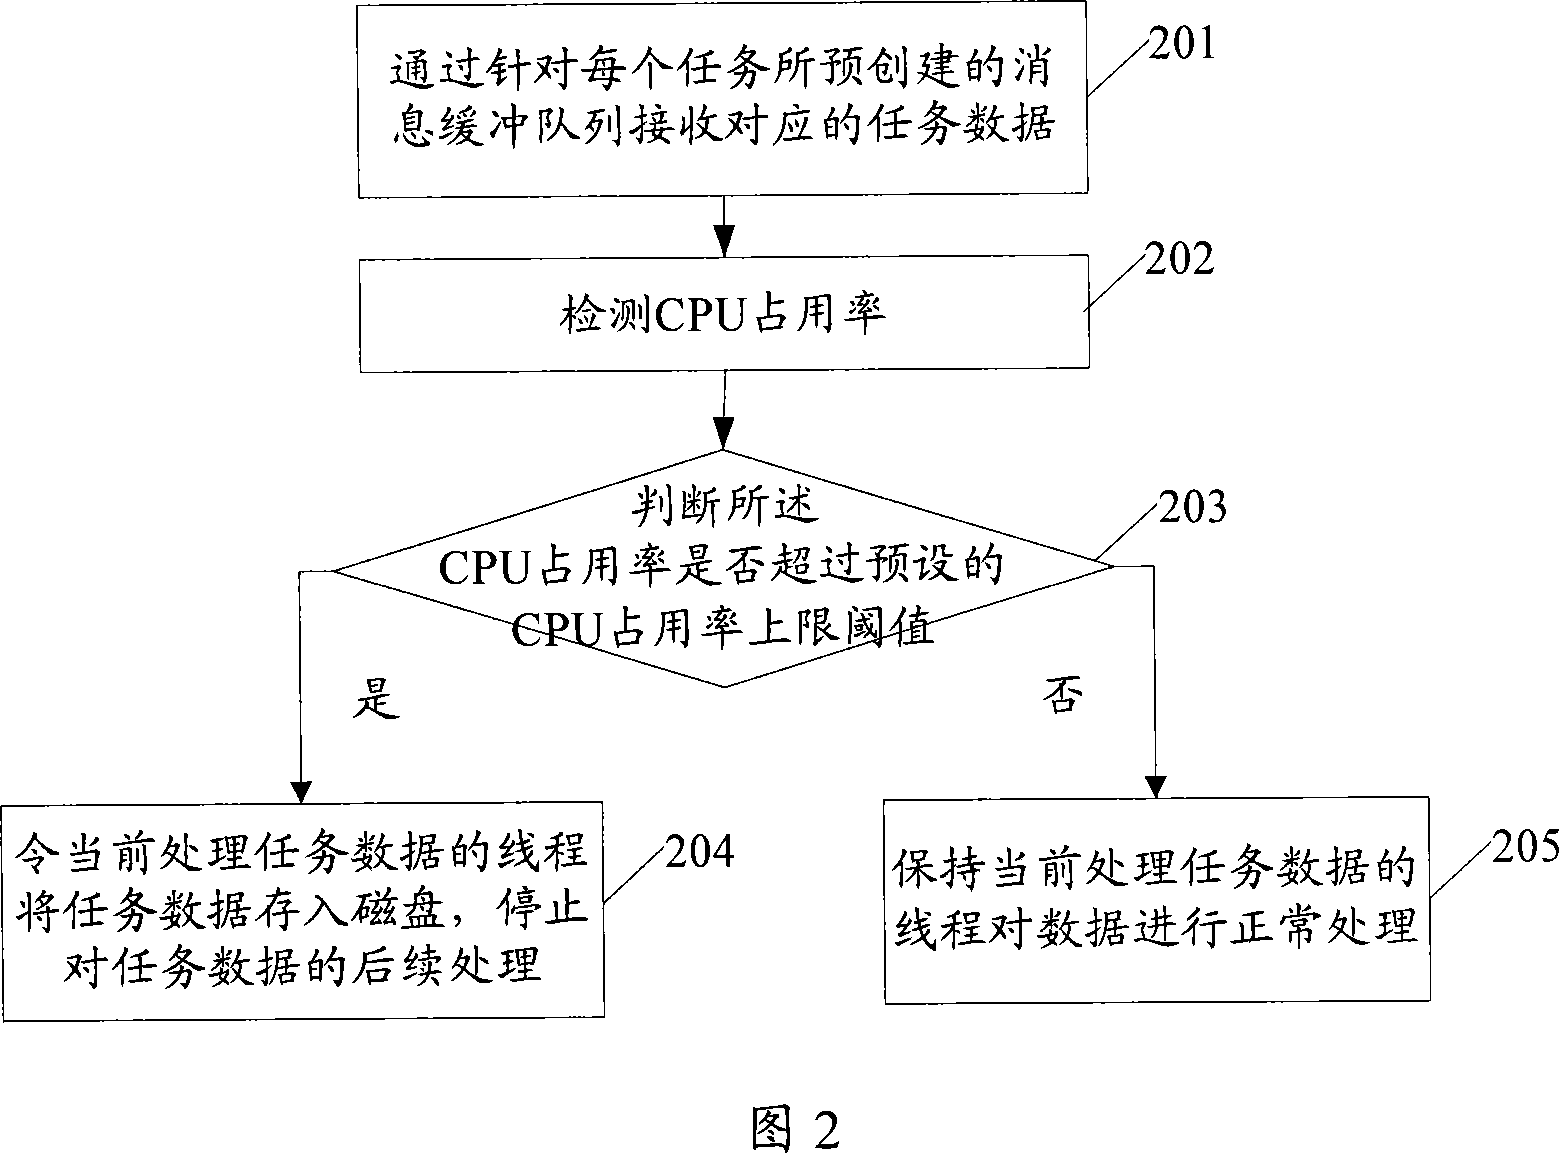 Traffic control method and service processing system